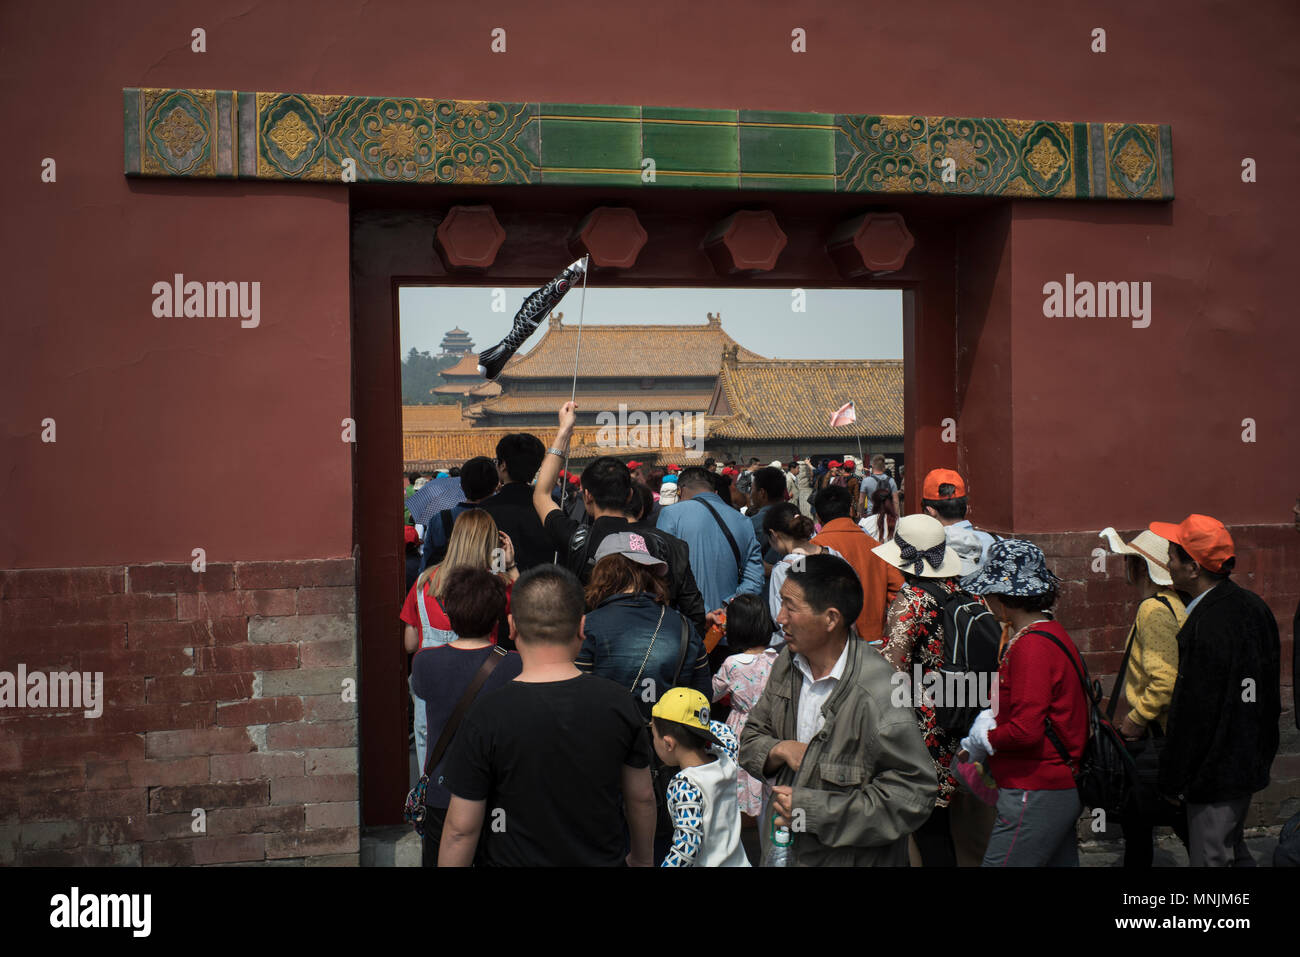 The Red Wall in Forbidden City Beijing China Stock Photo